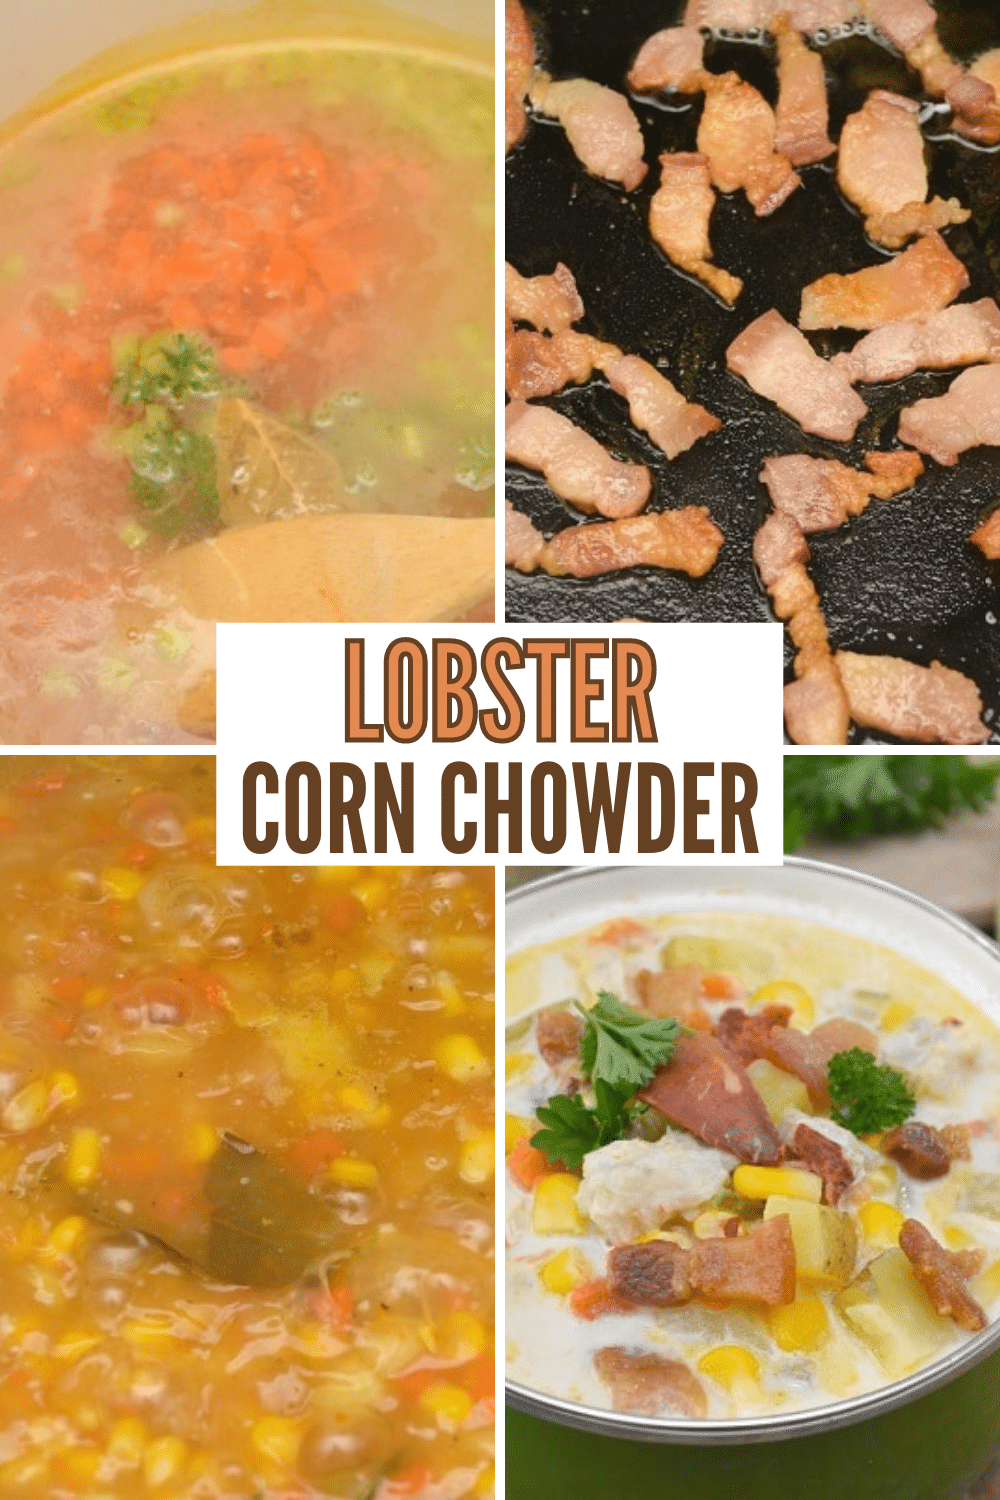 This Lobster Corn Chowder is a delicious way to warm up when it's cold outside and an affordable way to enjoy the subtle but decadent flavor of lobster. #souprecipes #lobster #chowder via @wondermomwannab